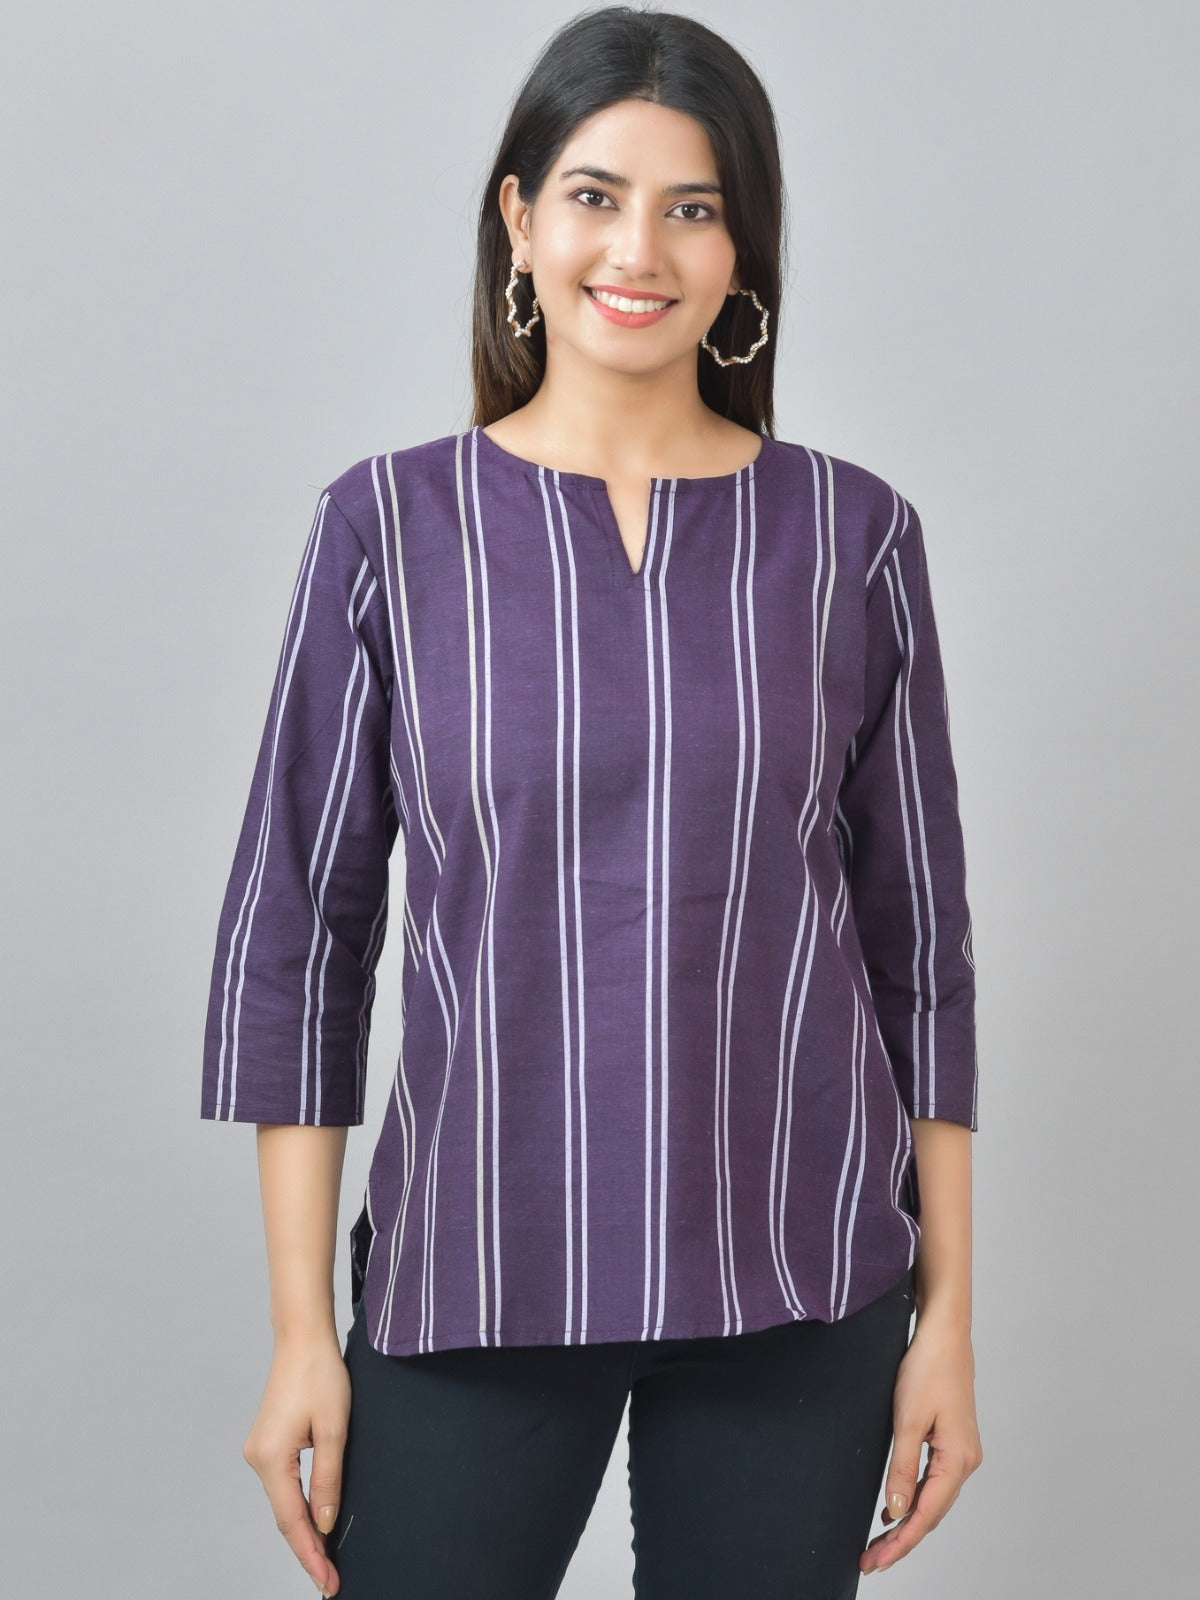 Pack Of 2 Blue And Purple Striped Cotton Womens Top Combo